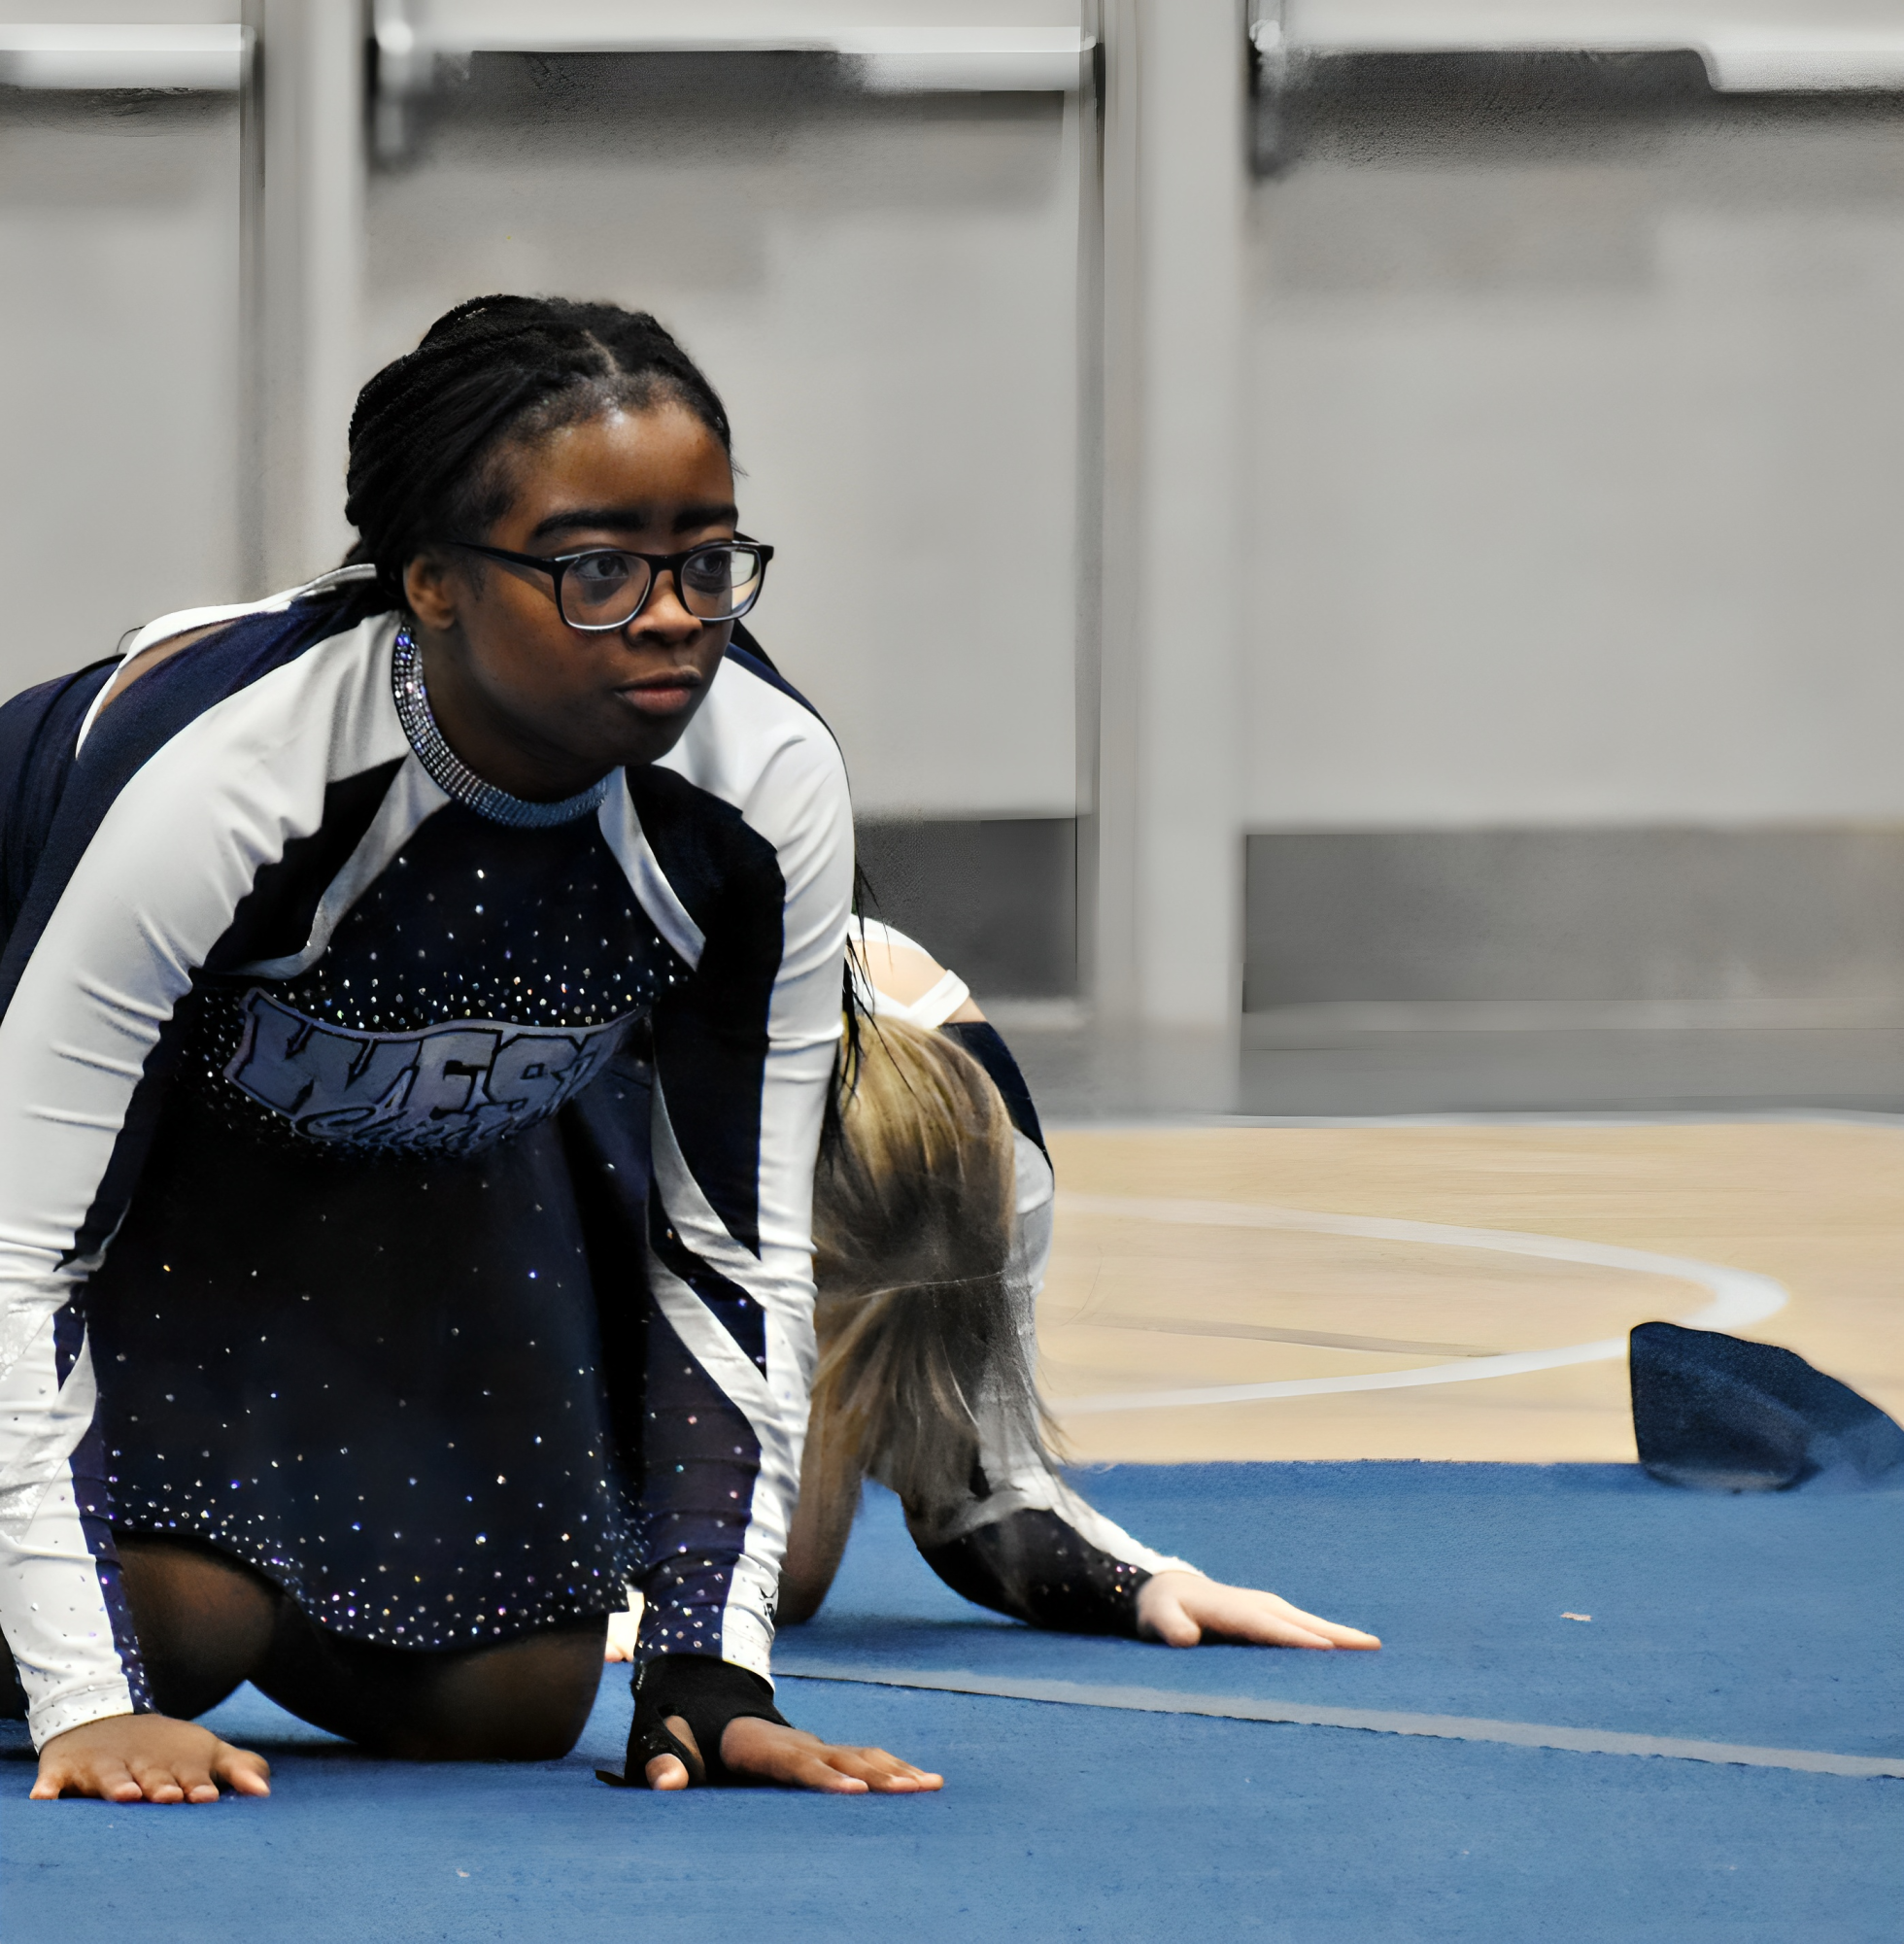 NyAra Tate awaits her cue on the mat during practice in January.